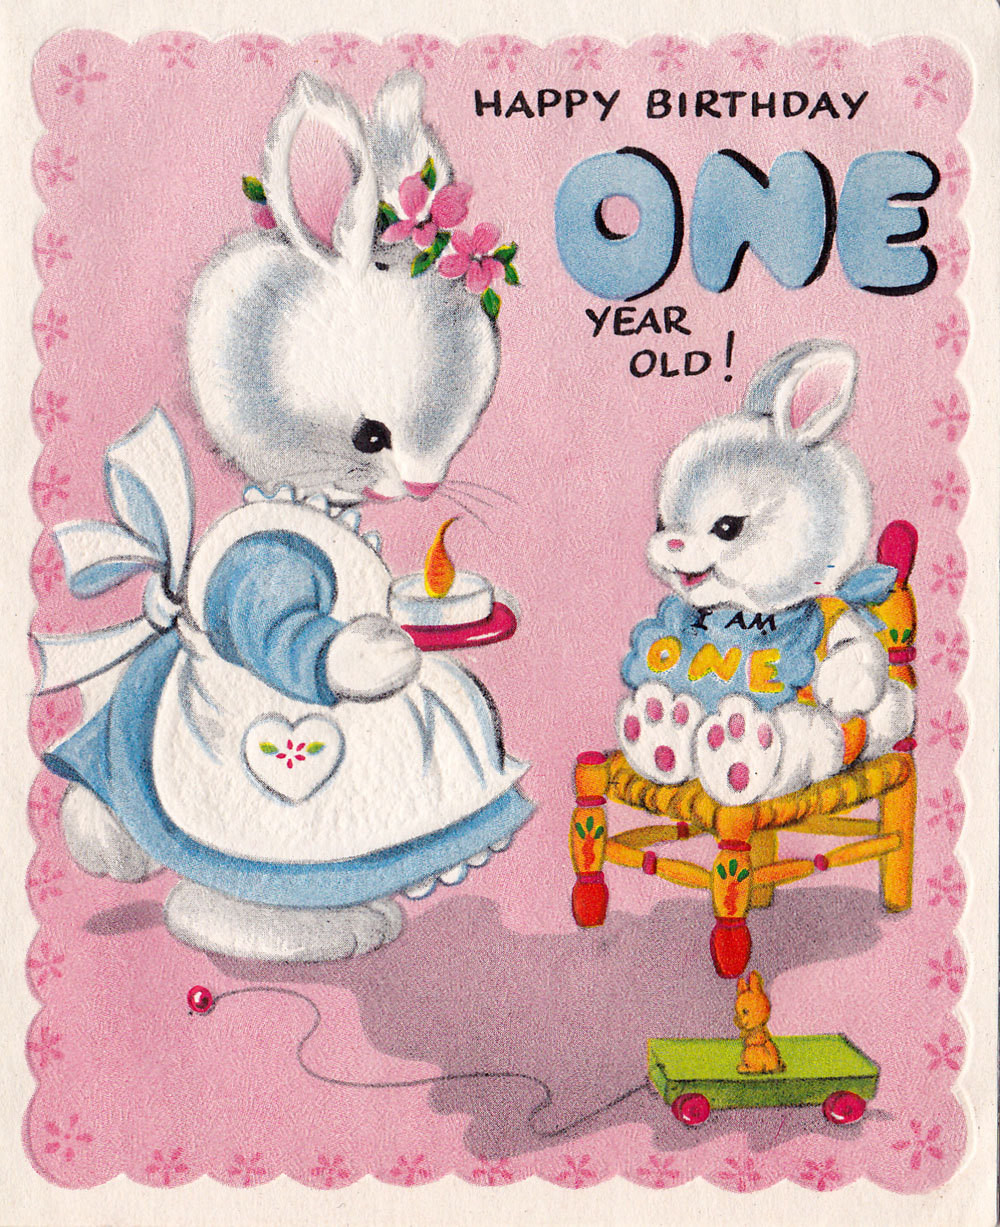 1 Year Old Birthday Wishes
 Vintage 1950s Happy Birthday 1 Year Old Greeting Card 01